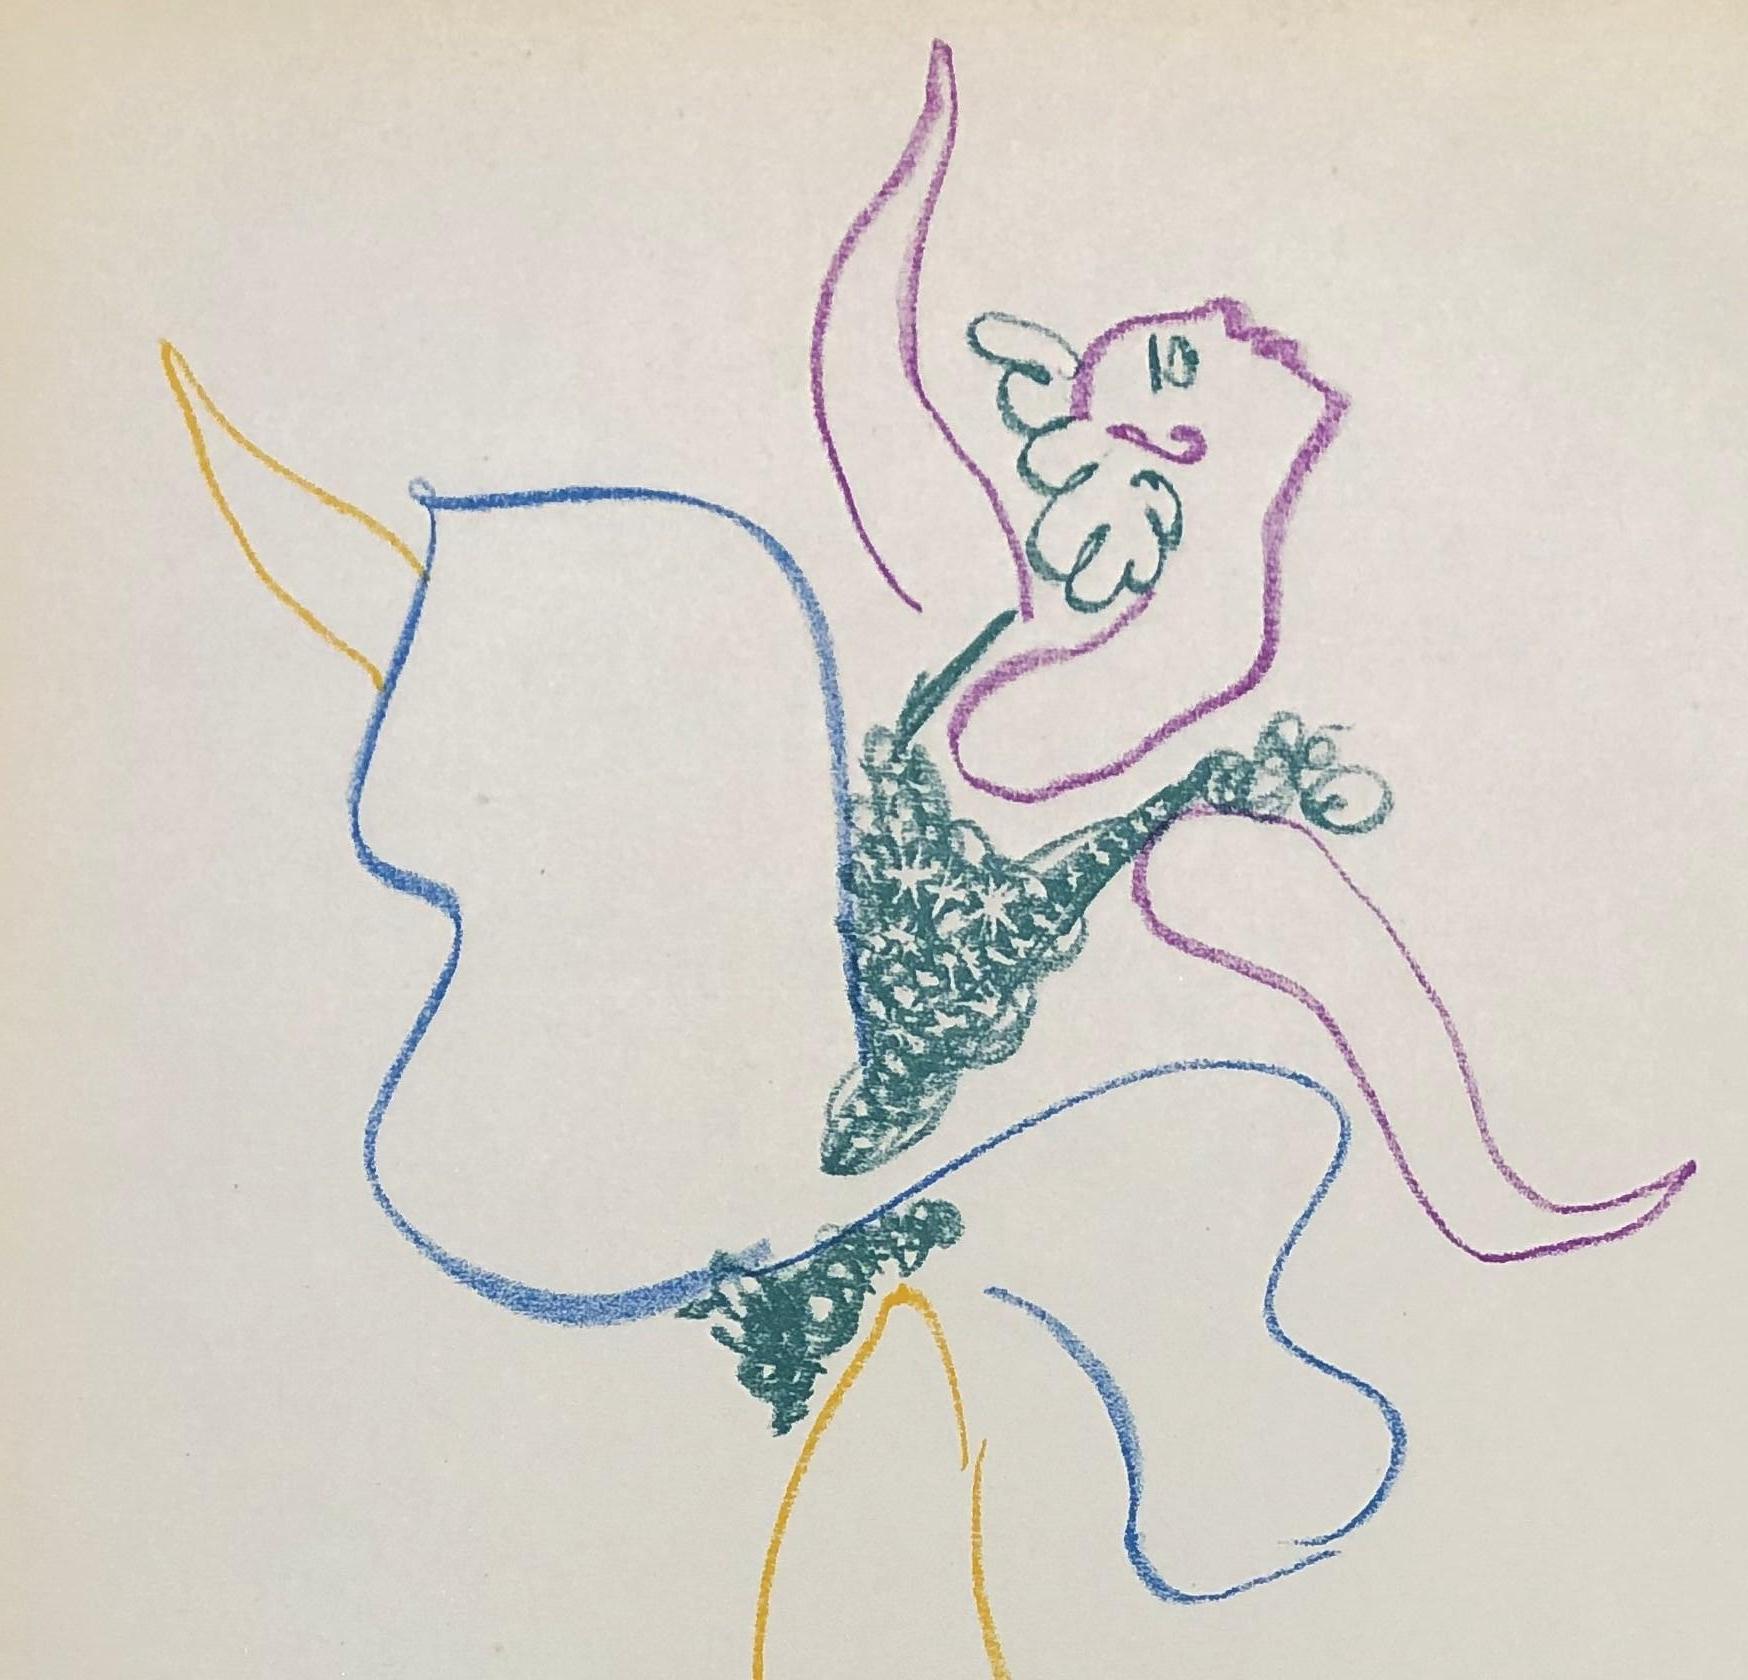 The Dancer - Original Lithograph - Printed Signature #Reference Bloch 767 - White Figurative Print by Pablo Picasso